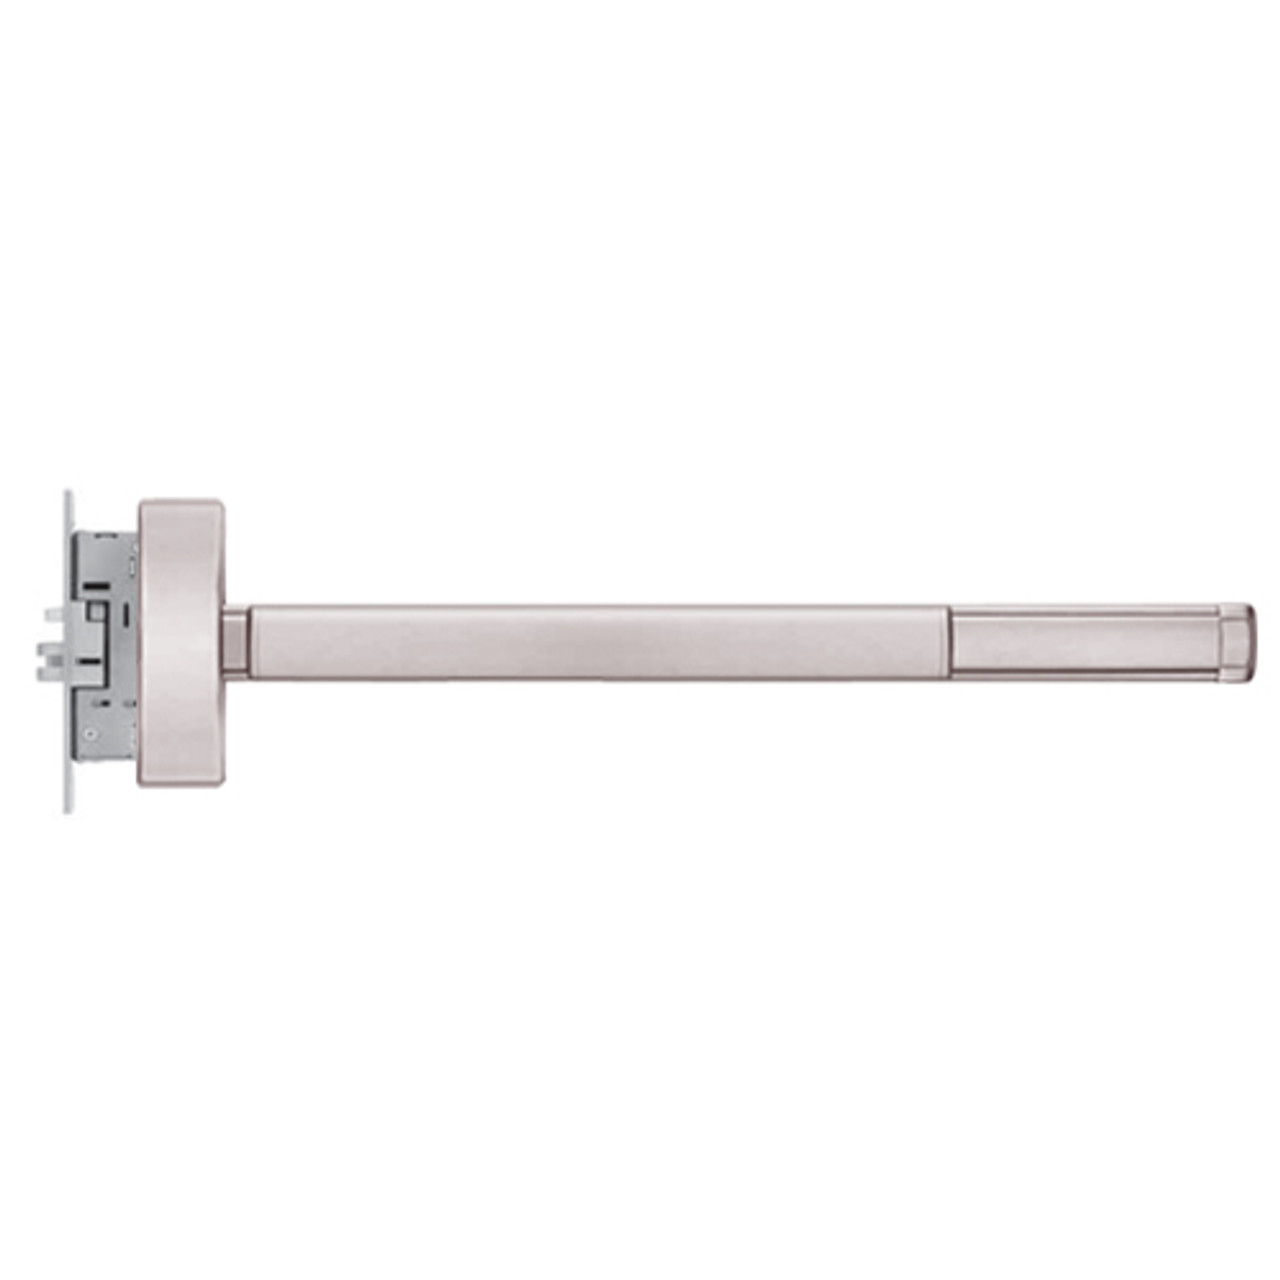 MLRFL2314-RHR-628-48 PHI 2300 Series Fire Rated Apex Mortise Exit Device with Motorized Latch Retraction Prepped for Lever-Knob Always Active in Satin Aluminum Finish